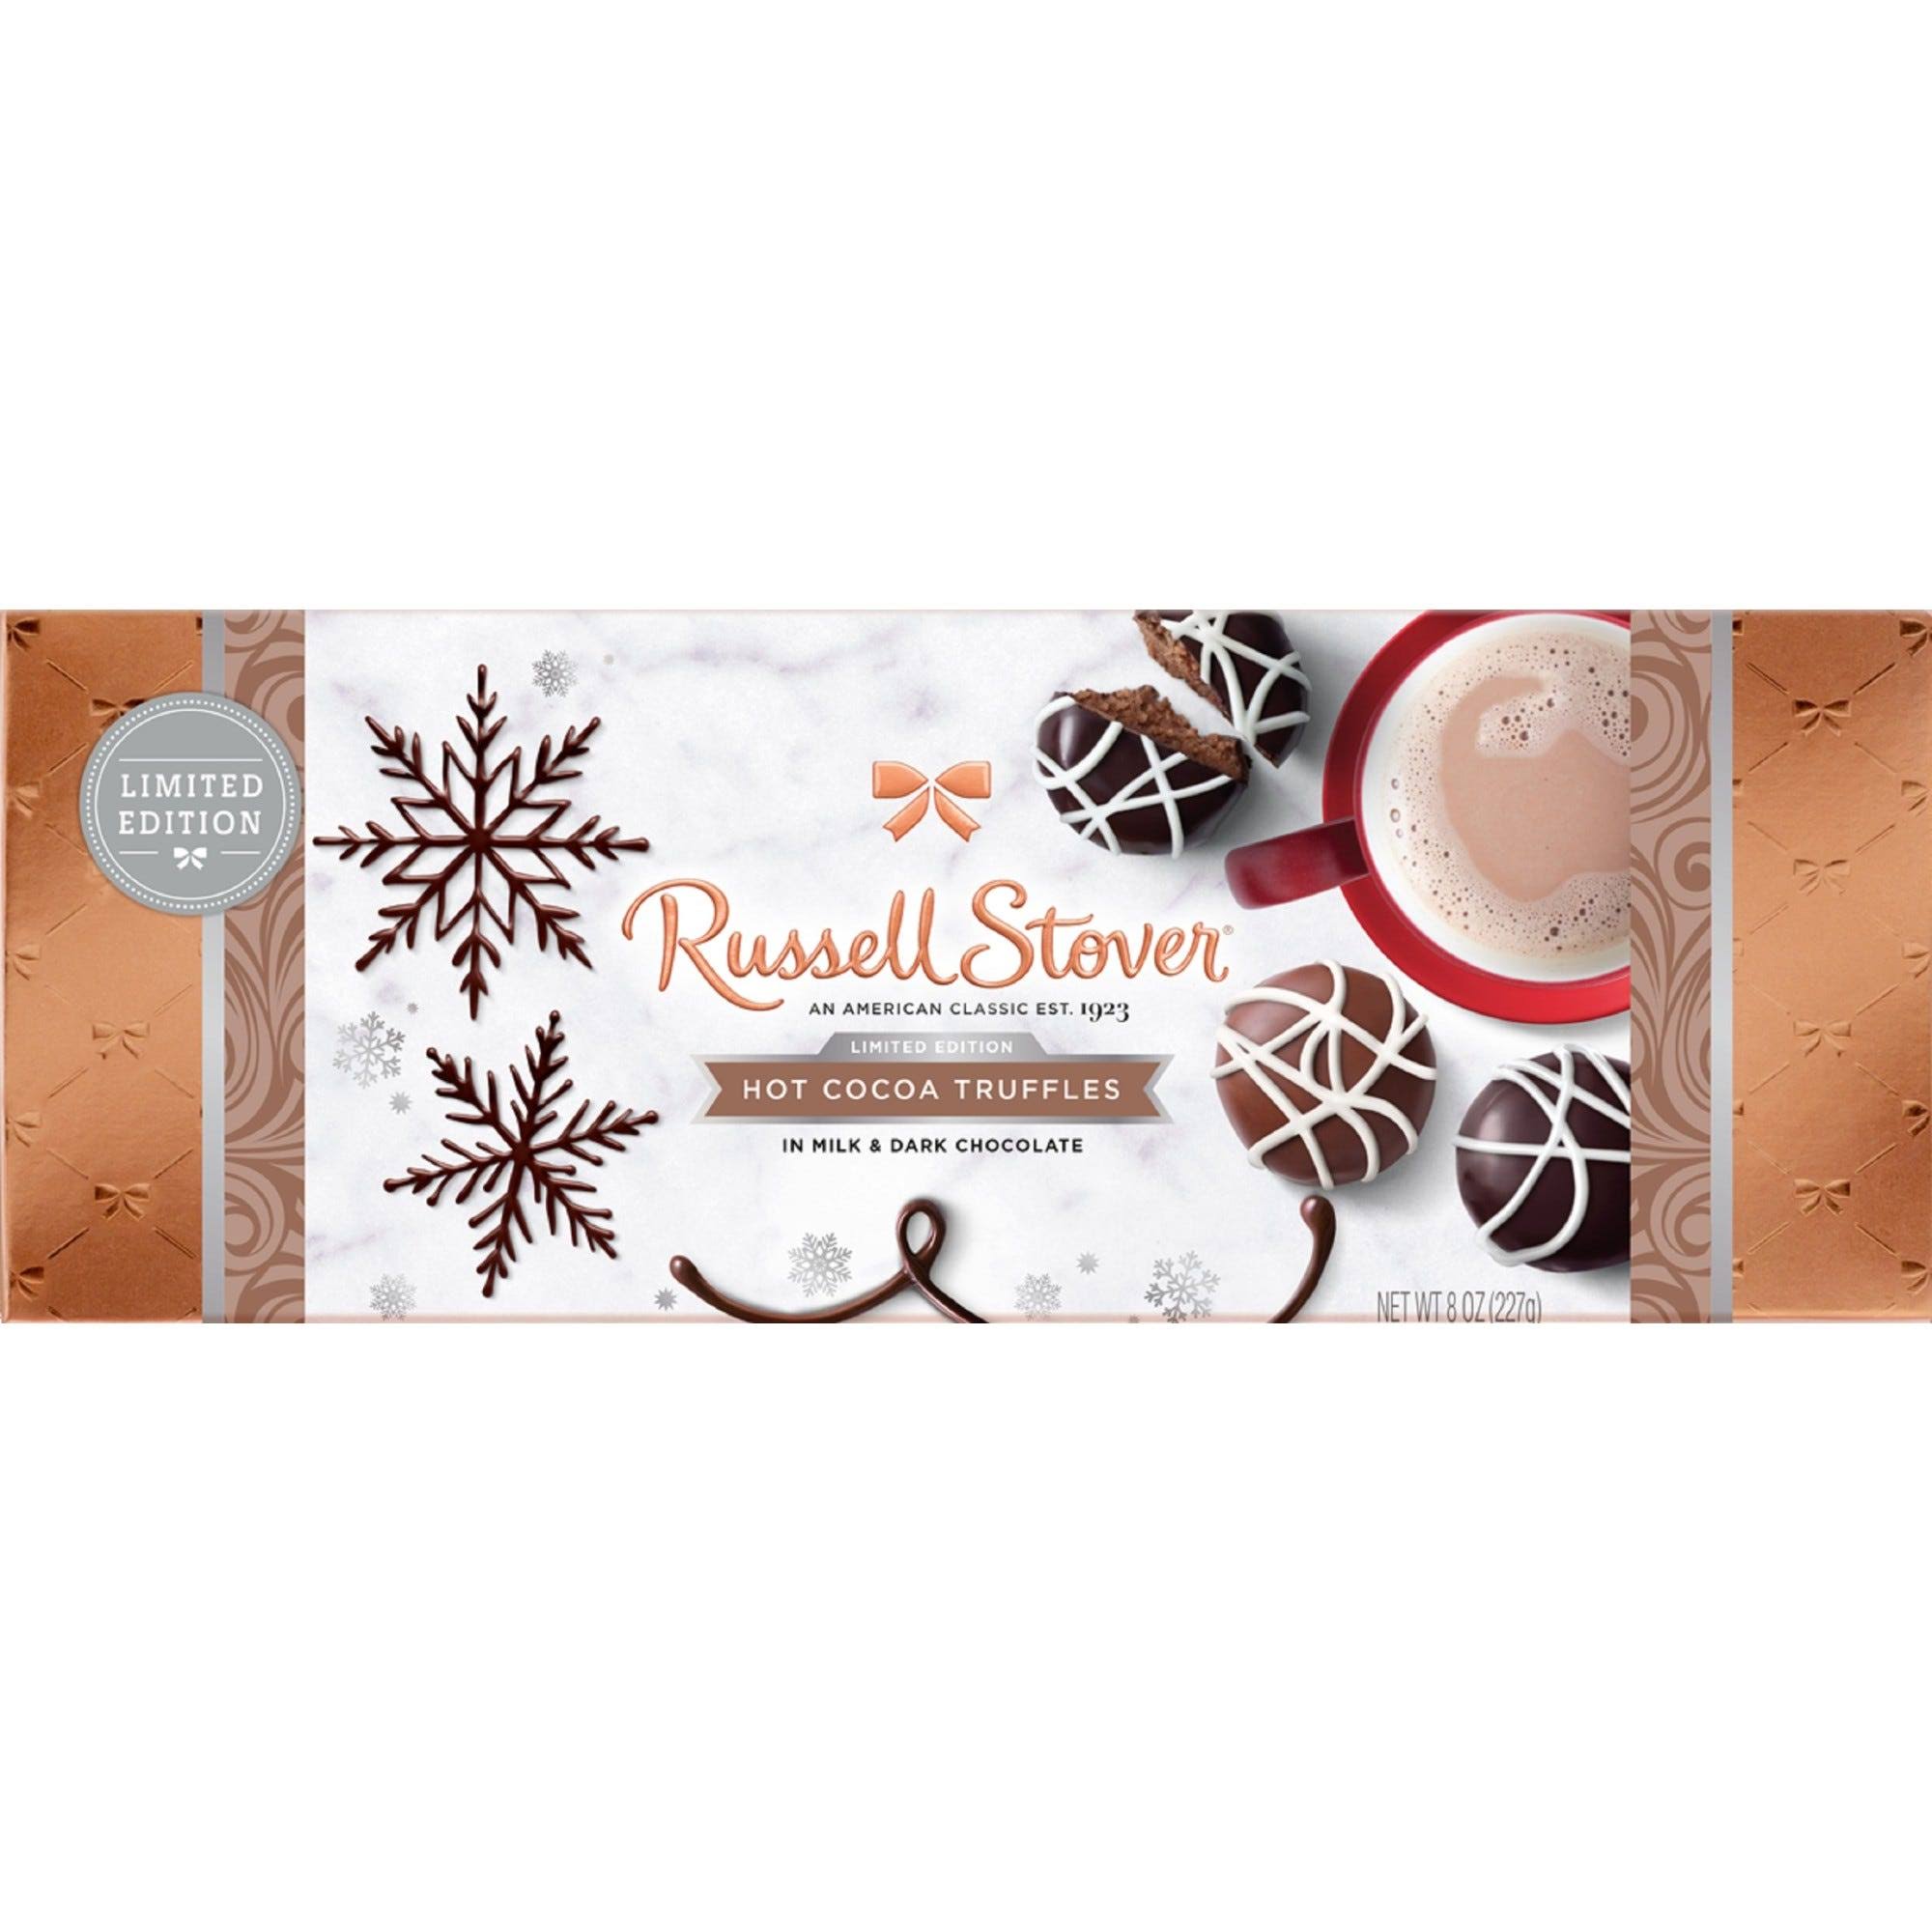 Russell Stover Hot Cocoa Truffles in Milk & Dark Chocolate - 8 oz